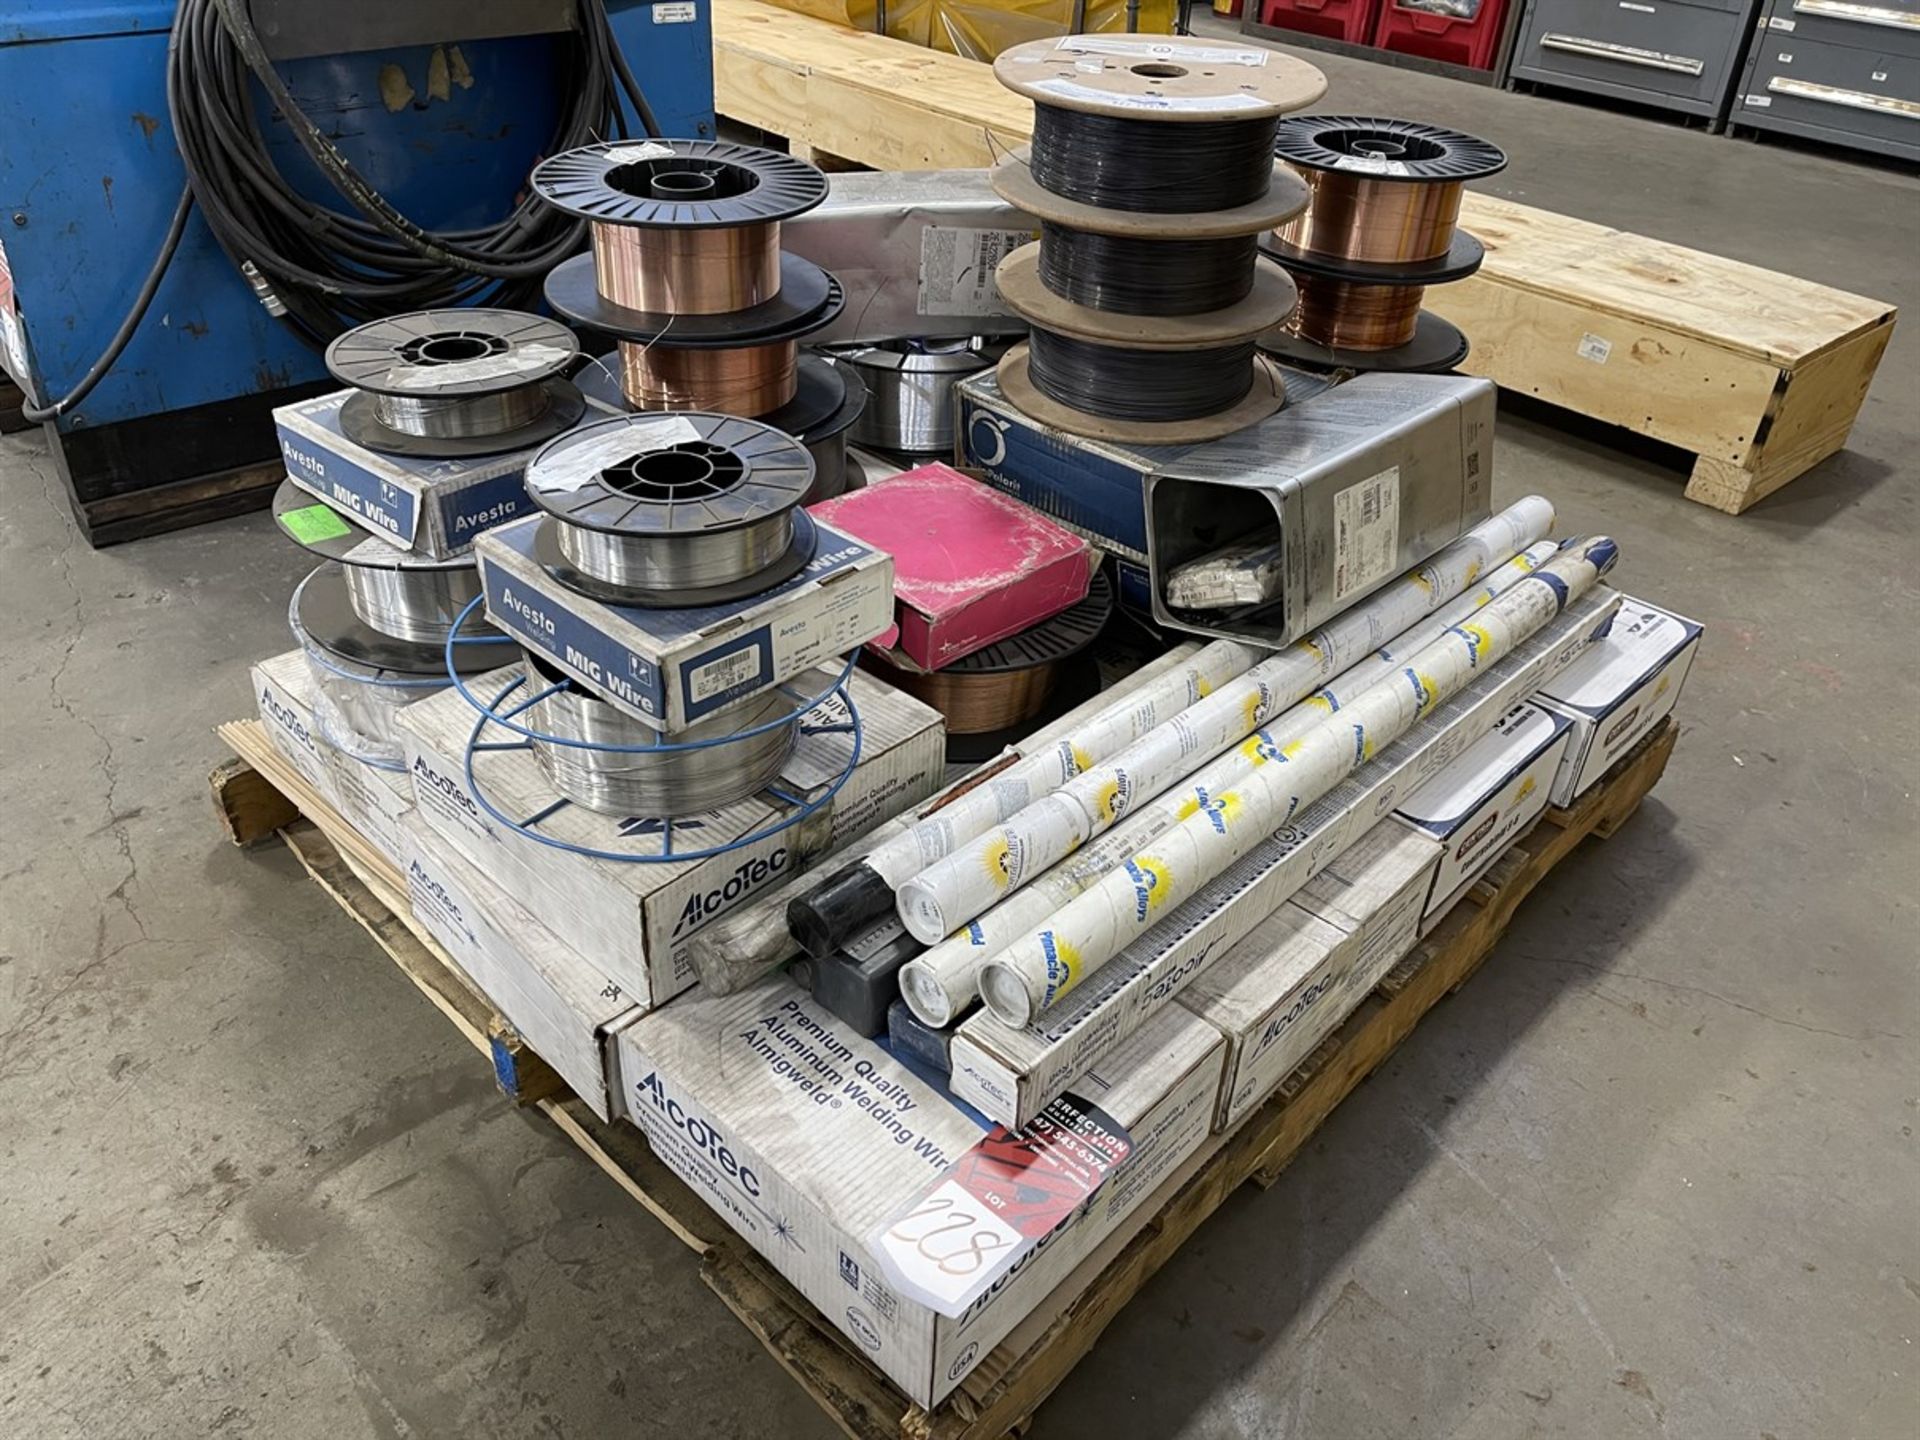 Lot of Assorted Welding Wire Spools and TIG Welding Rod Including AlcoTec ER5356, ER4043, Arcos